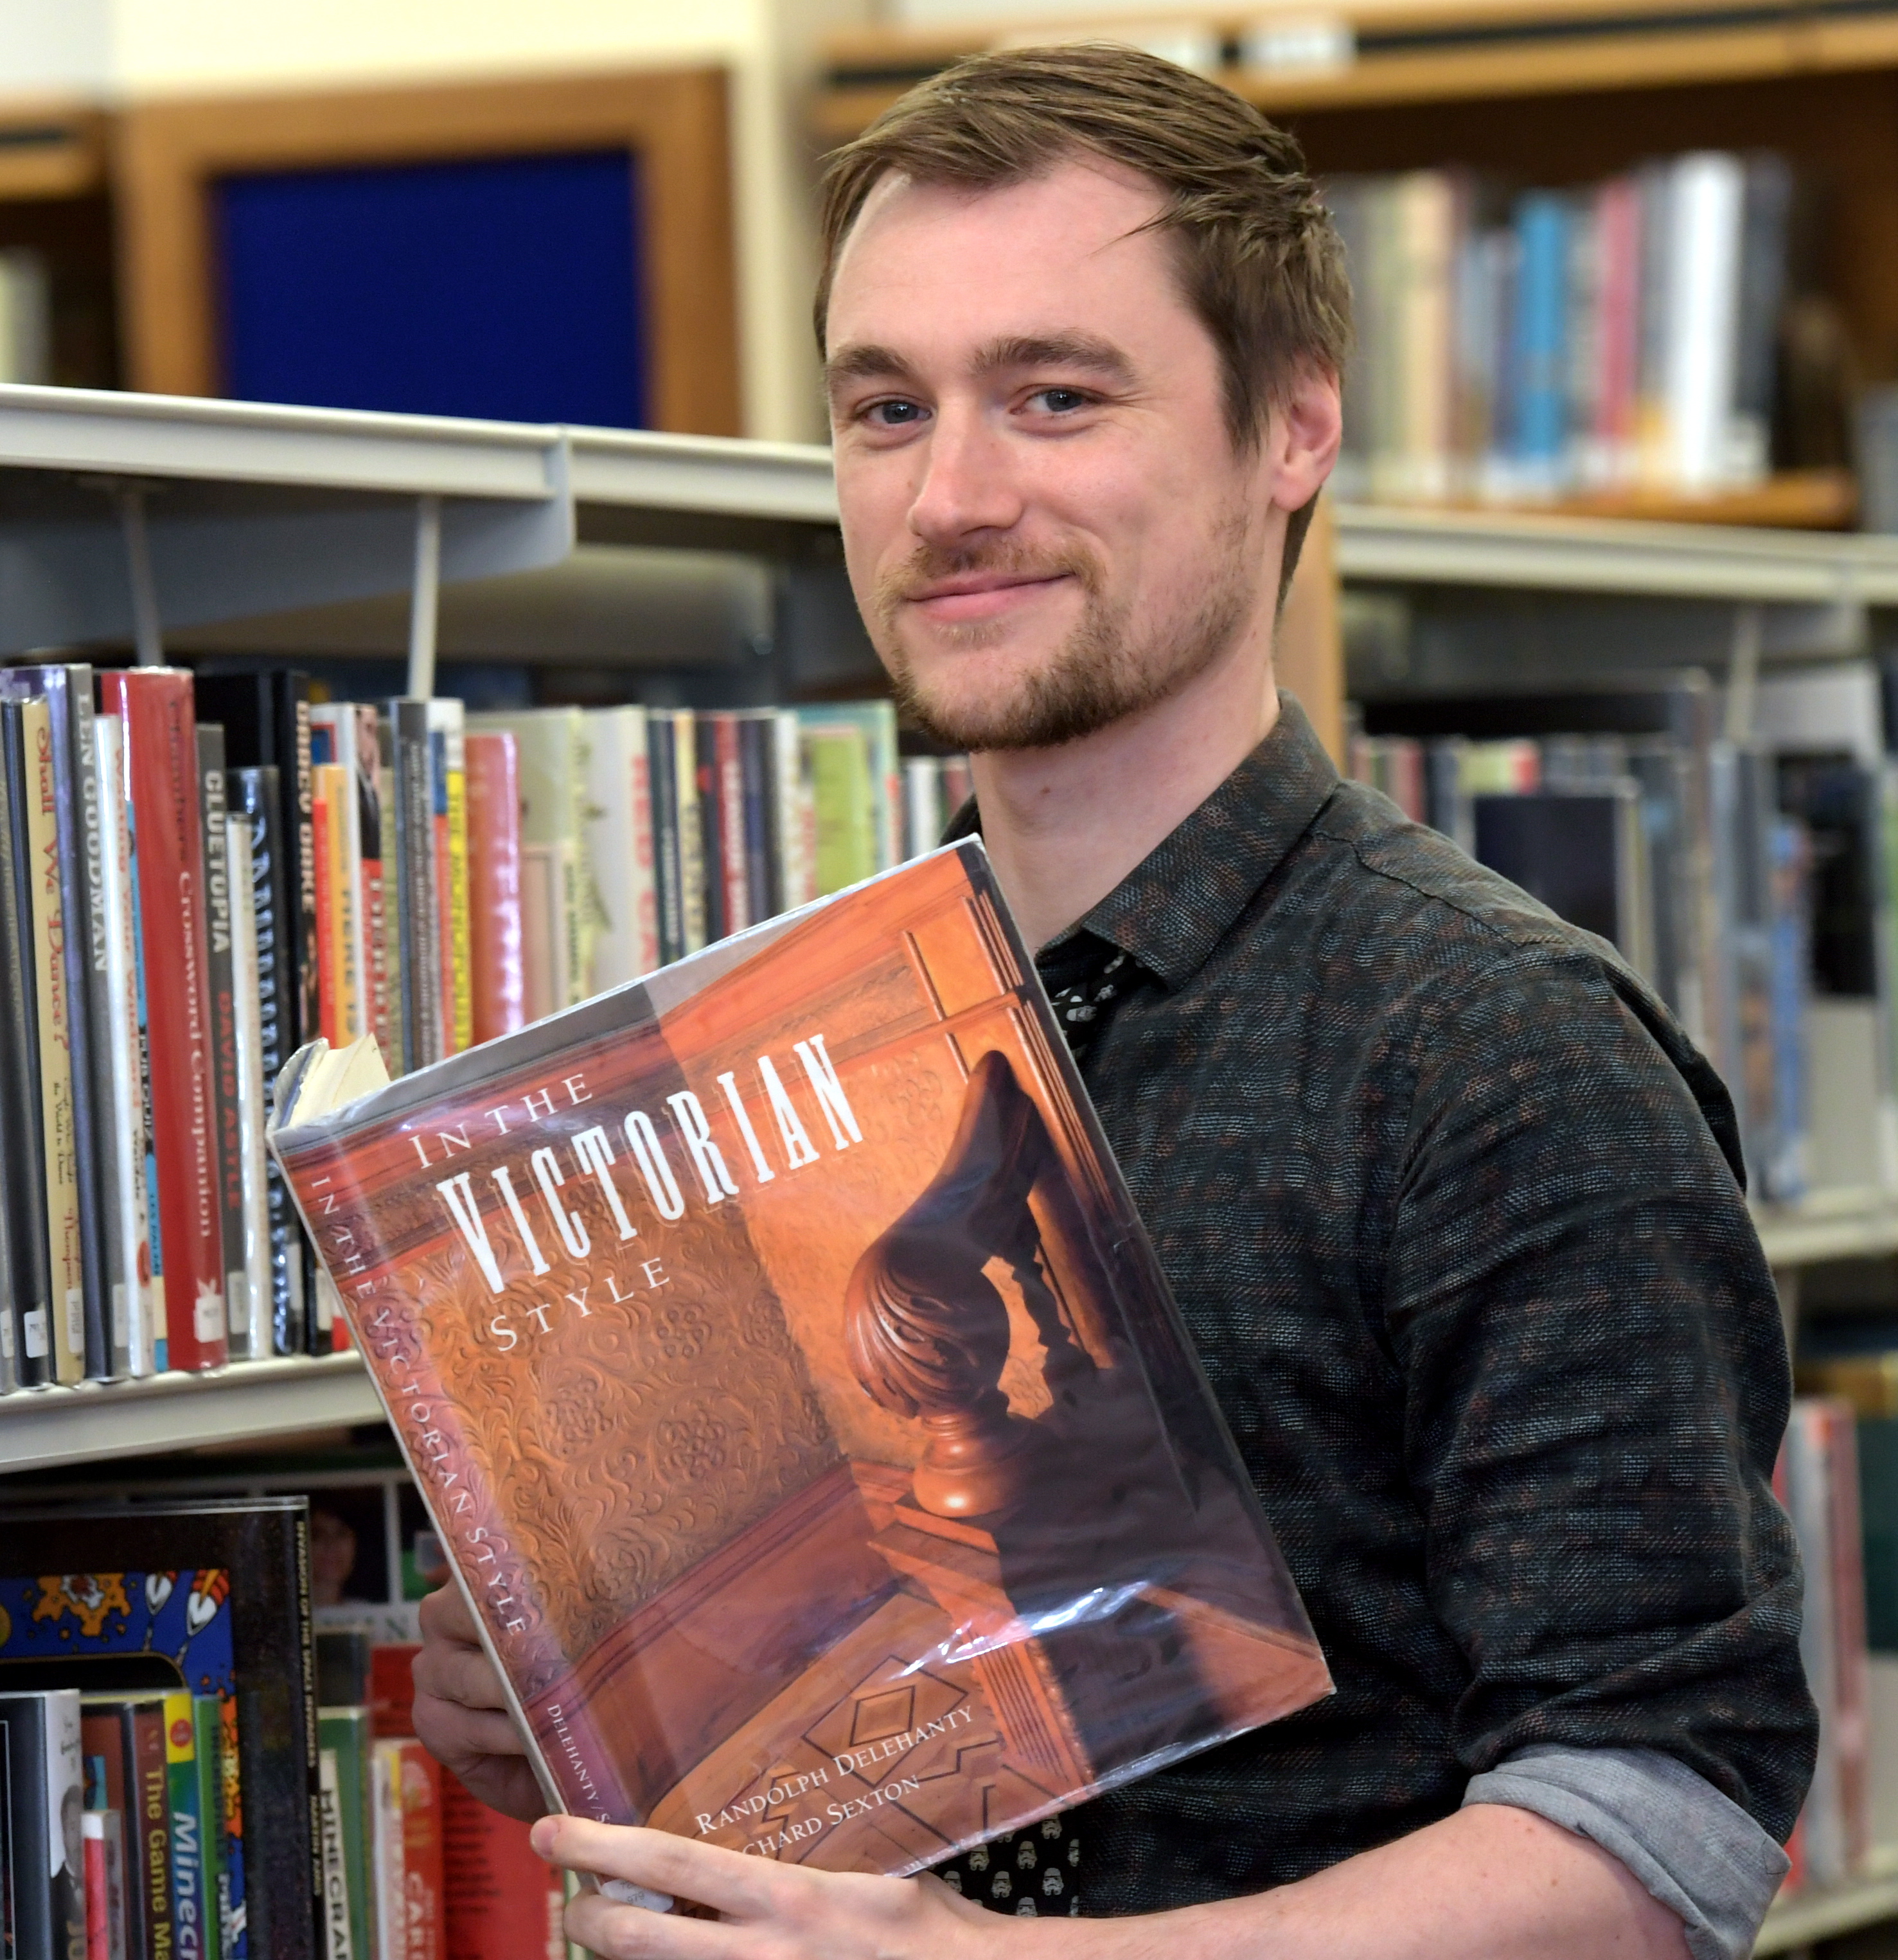 Aberdeen Central Library. A book has mysteriously been returned to the library after being posted 871 miles from Poland. Dallas King is pictured with the book.
22/01/19
Picture by KATH FLANNERY